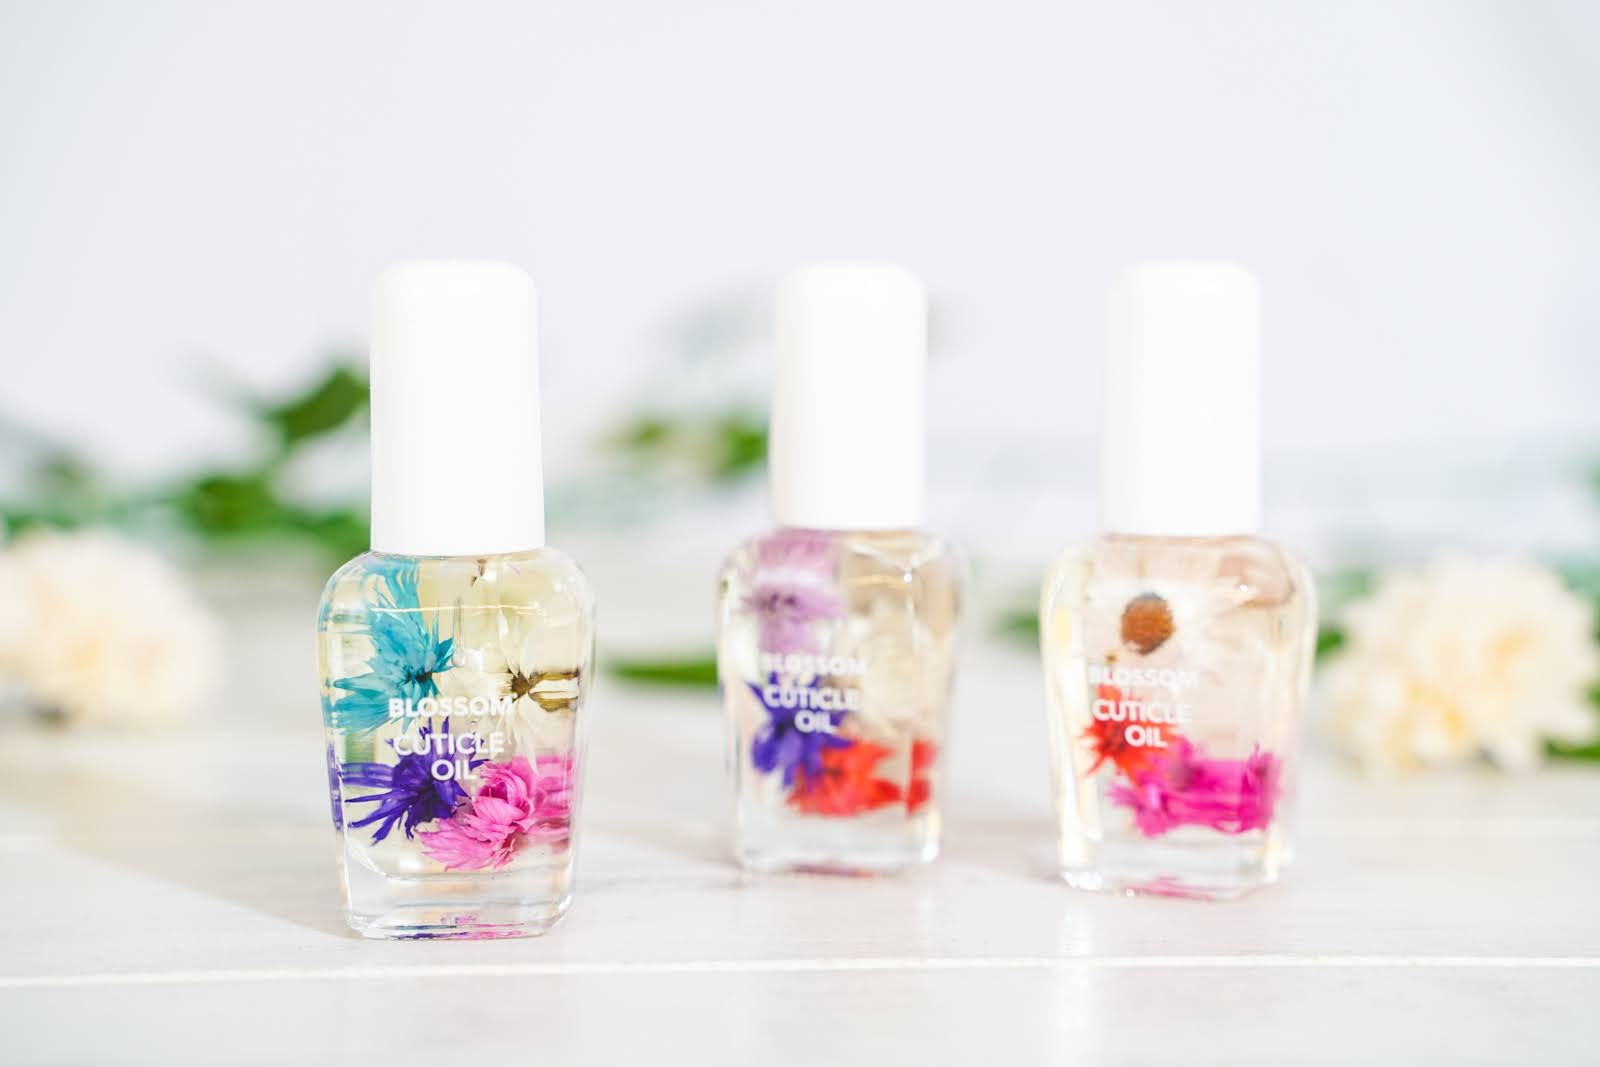 3 PIECE GIFT SET［SCENTED CUTICLE OIL］